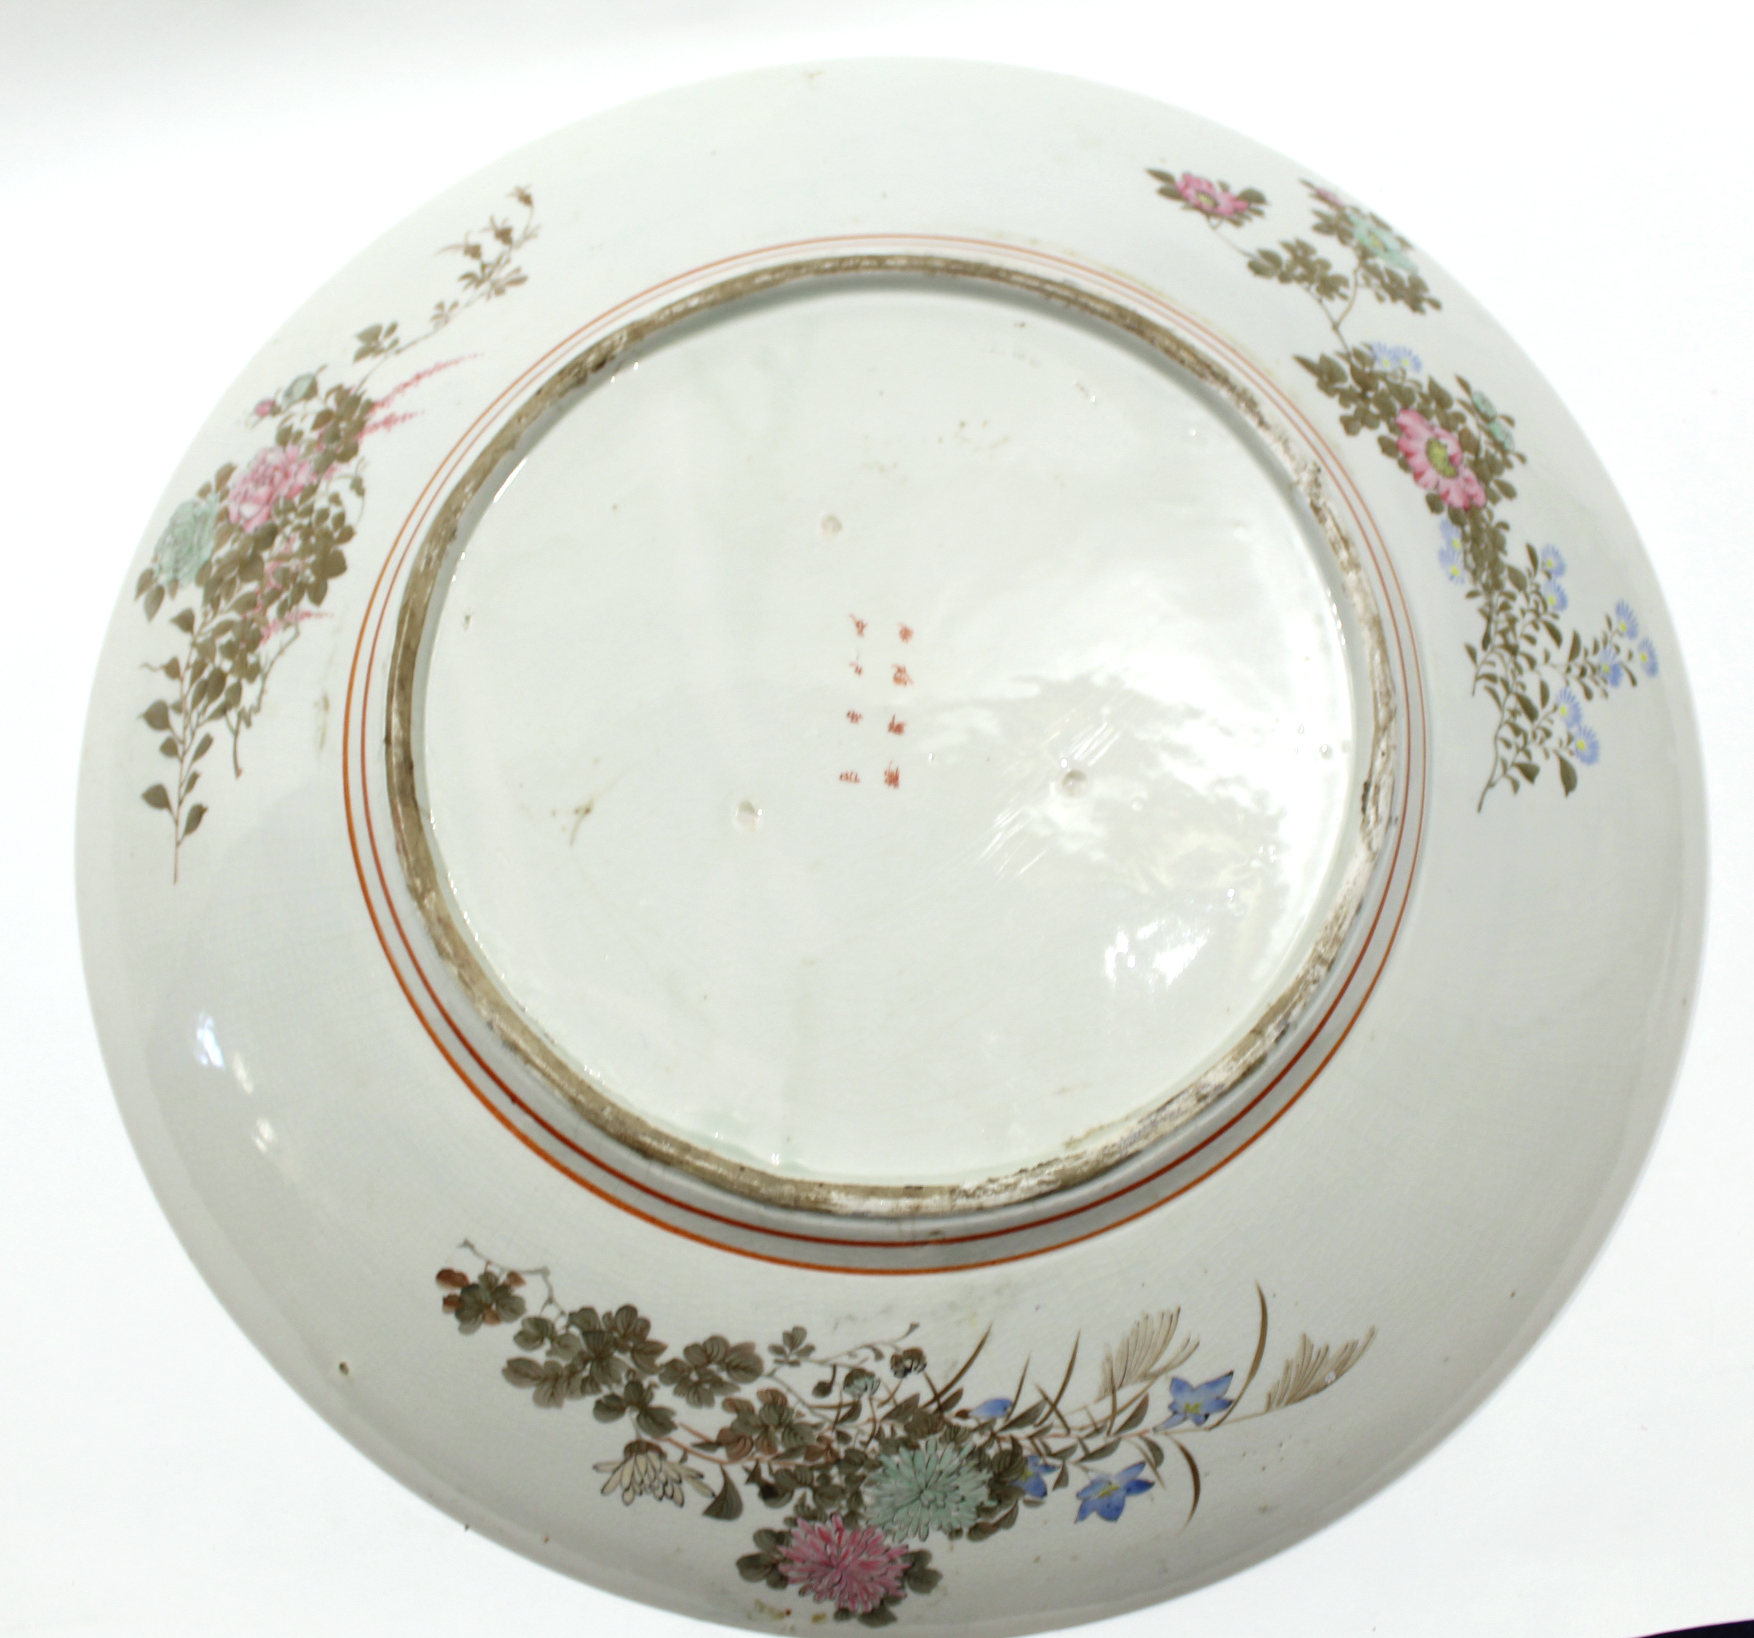 Large Satsuma dish, Meiji period, the centre decorated with a landscape scene and mountains with - Image 4 of 6